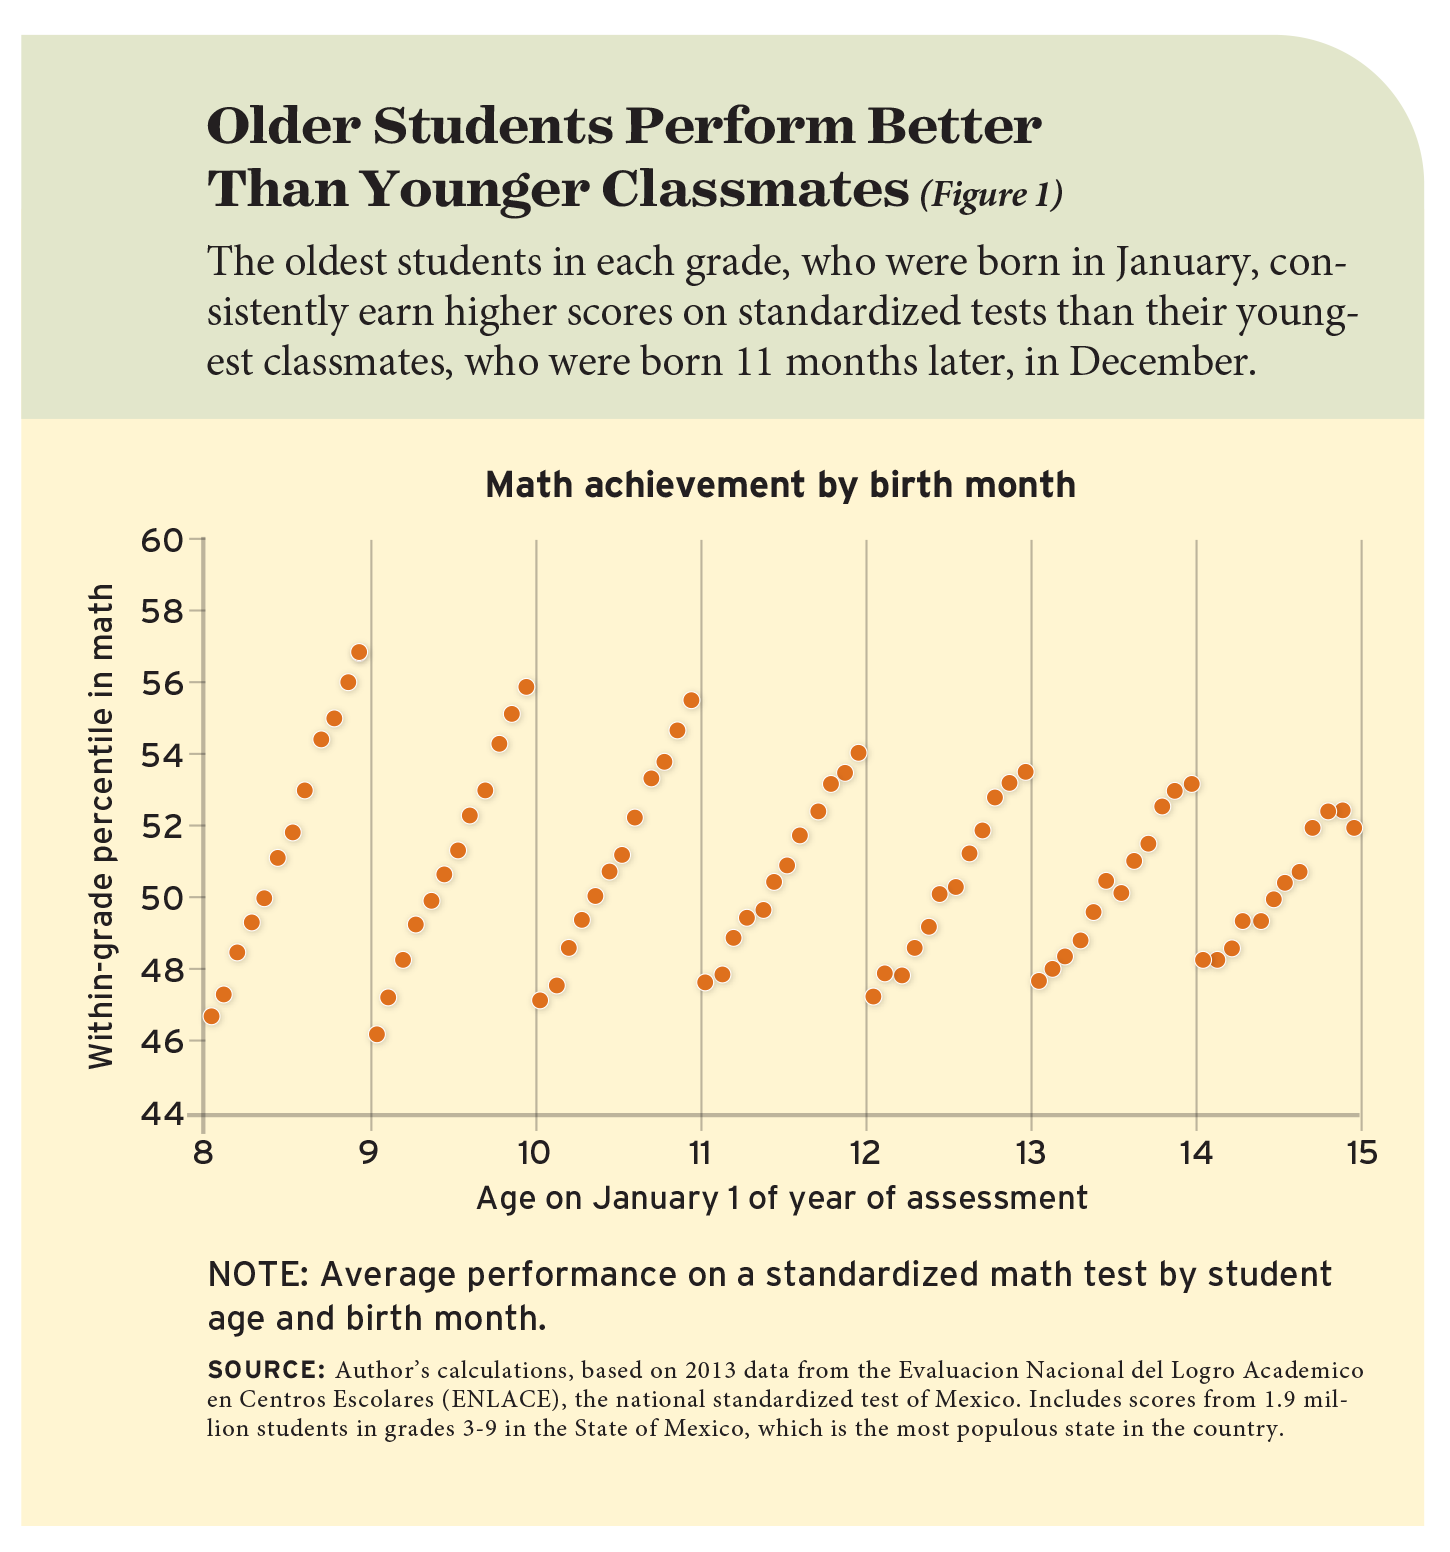 Older Students Perform Better Than Younger Classmates (Figure 1)